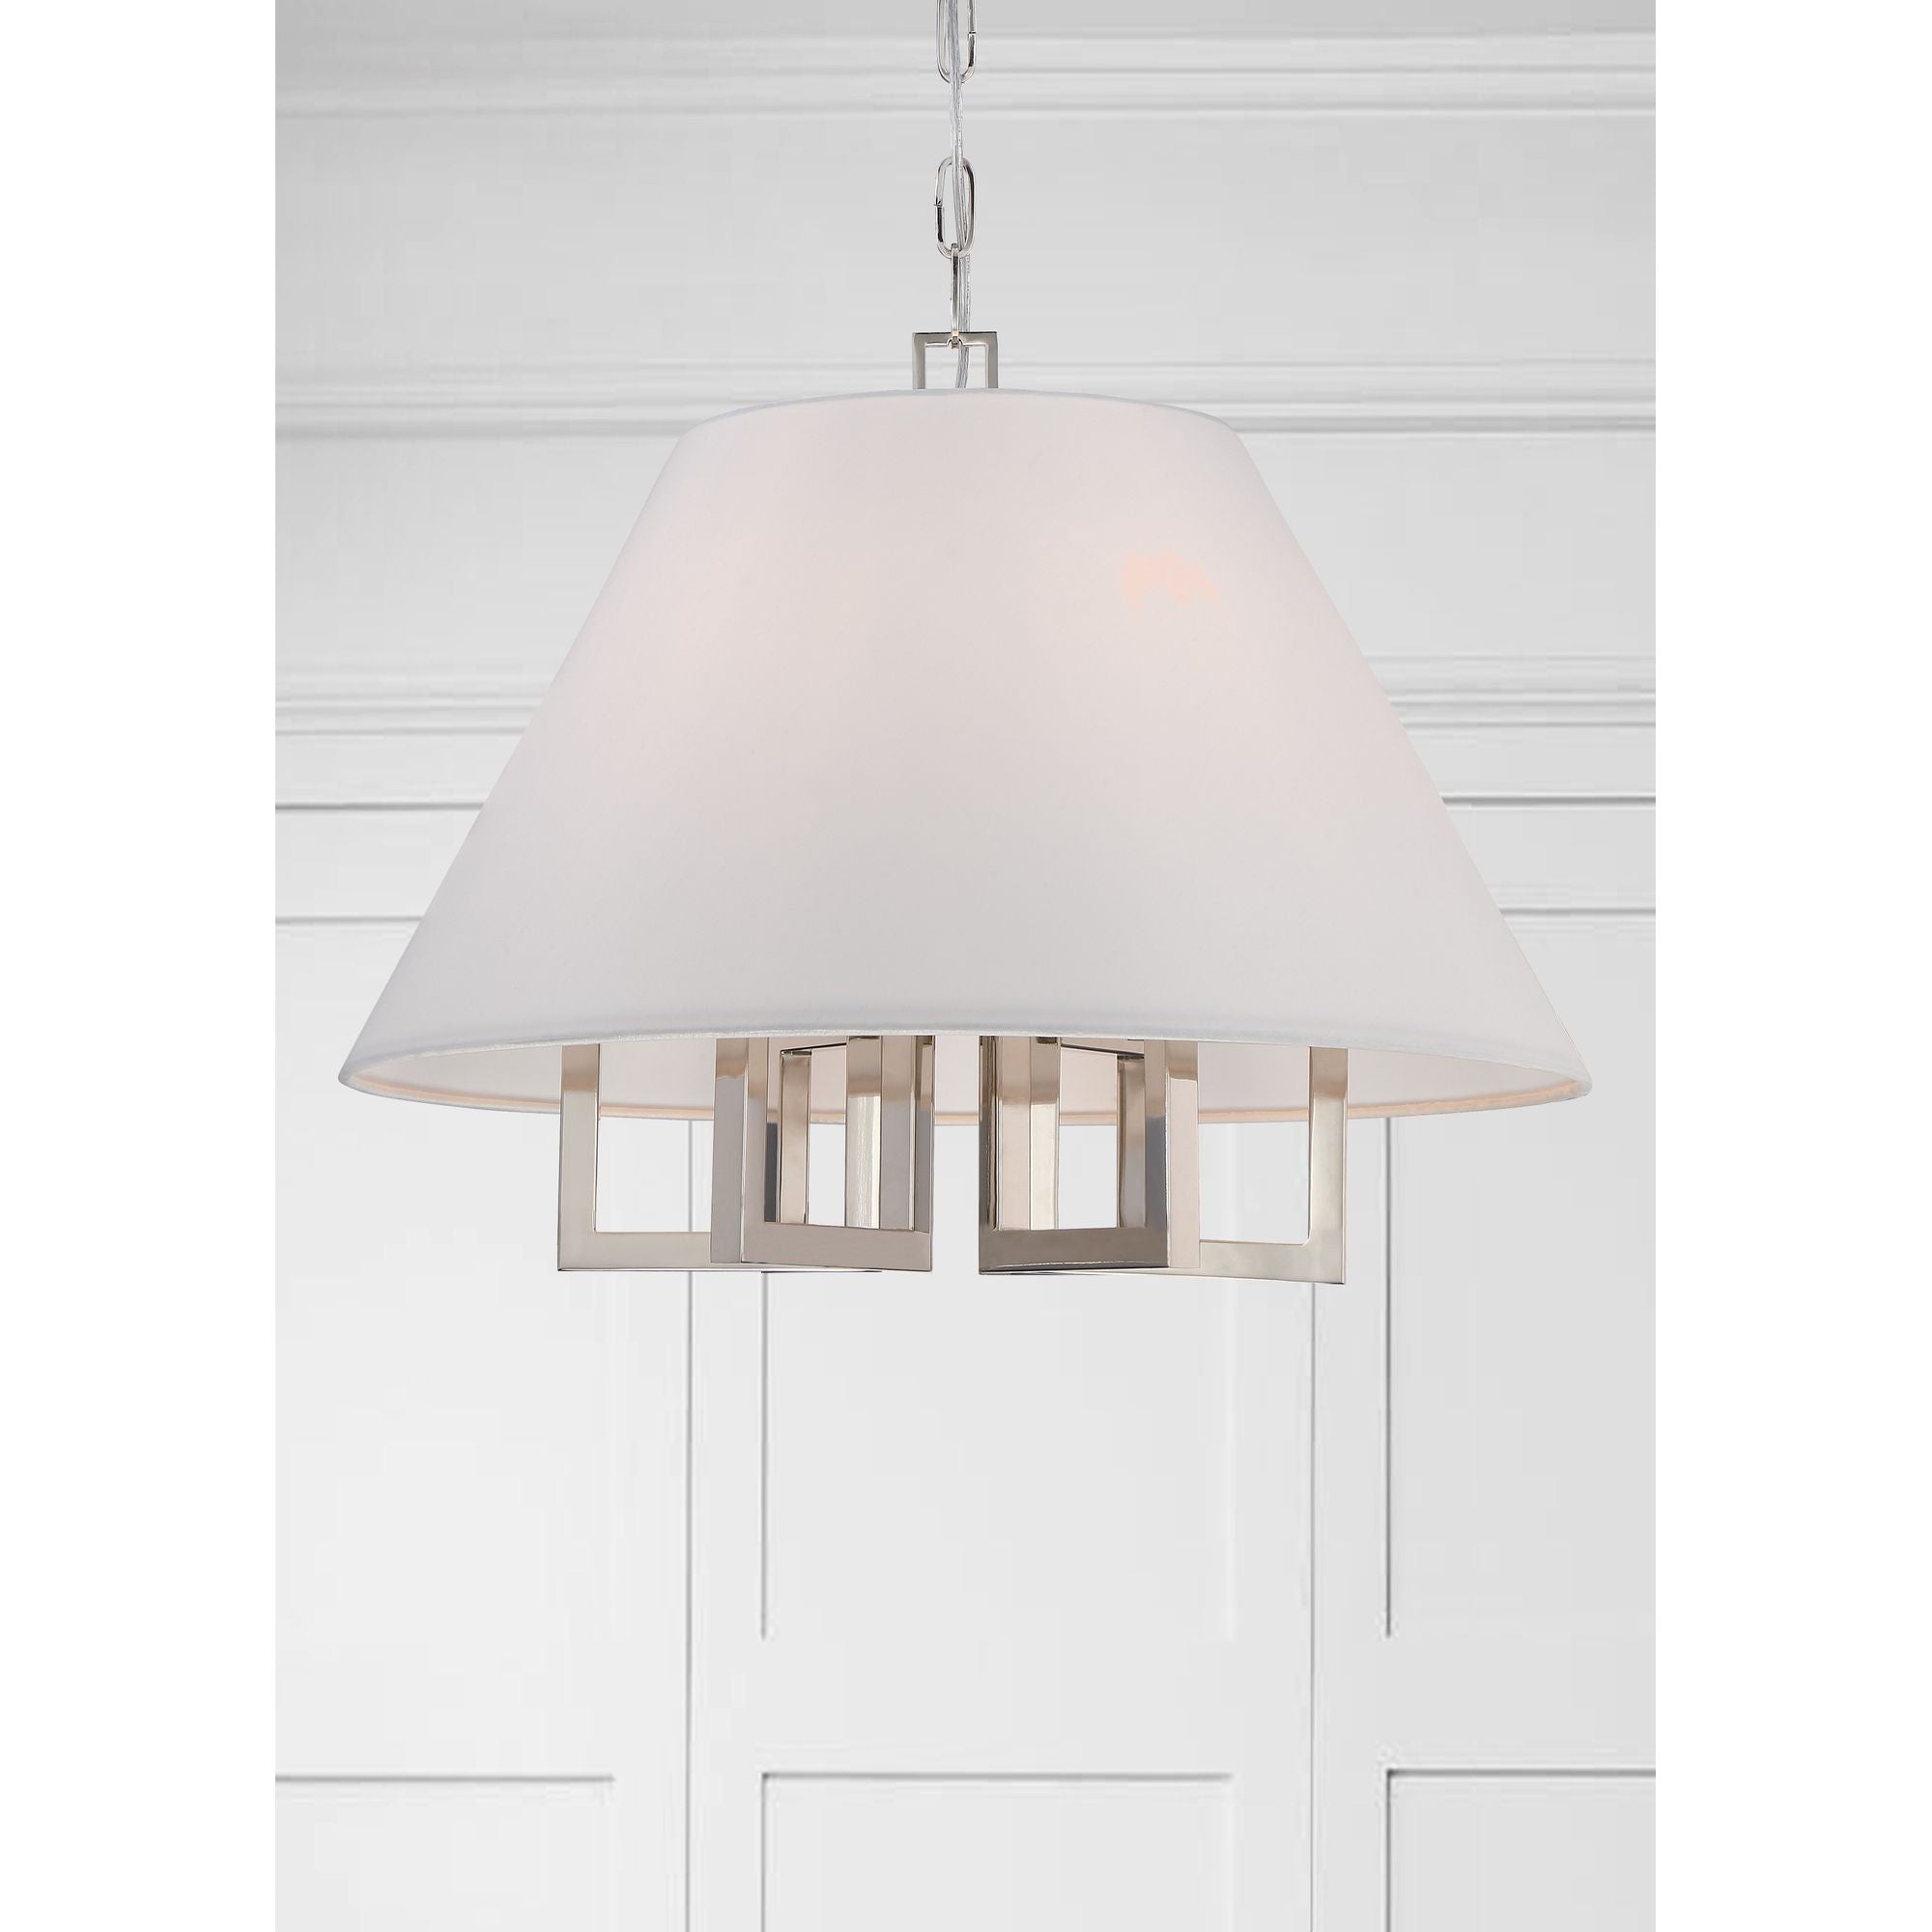 Libby Langdon for Crystorama Westwood 6 Light Polished Nickel Chandelier